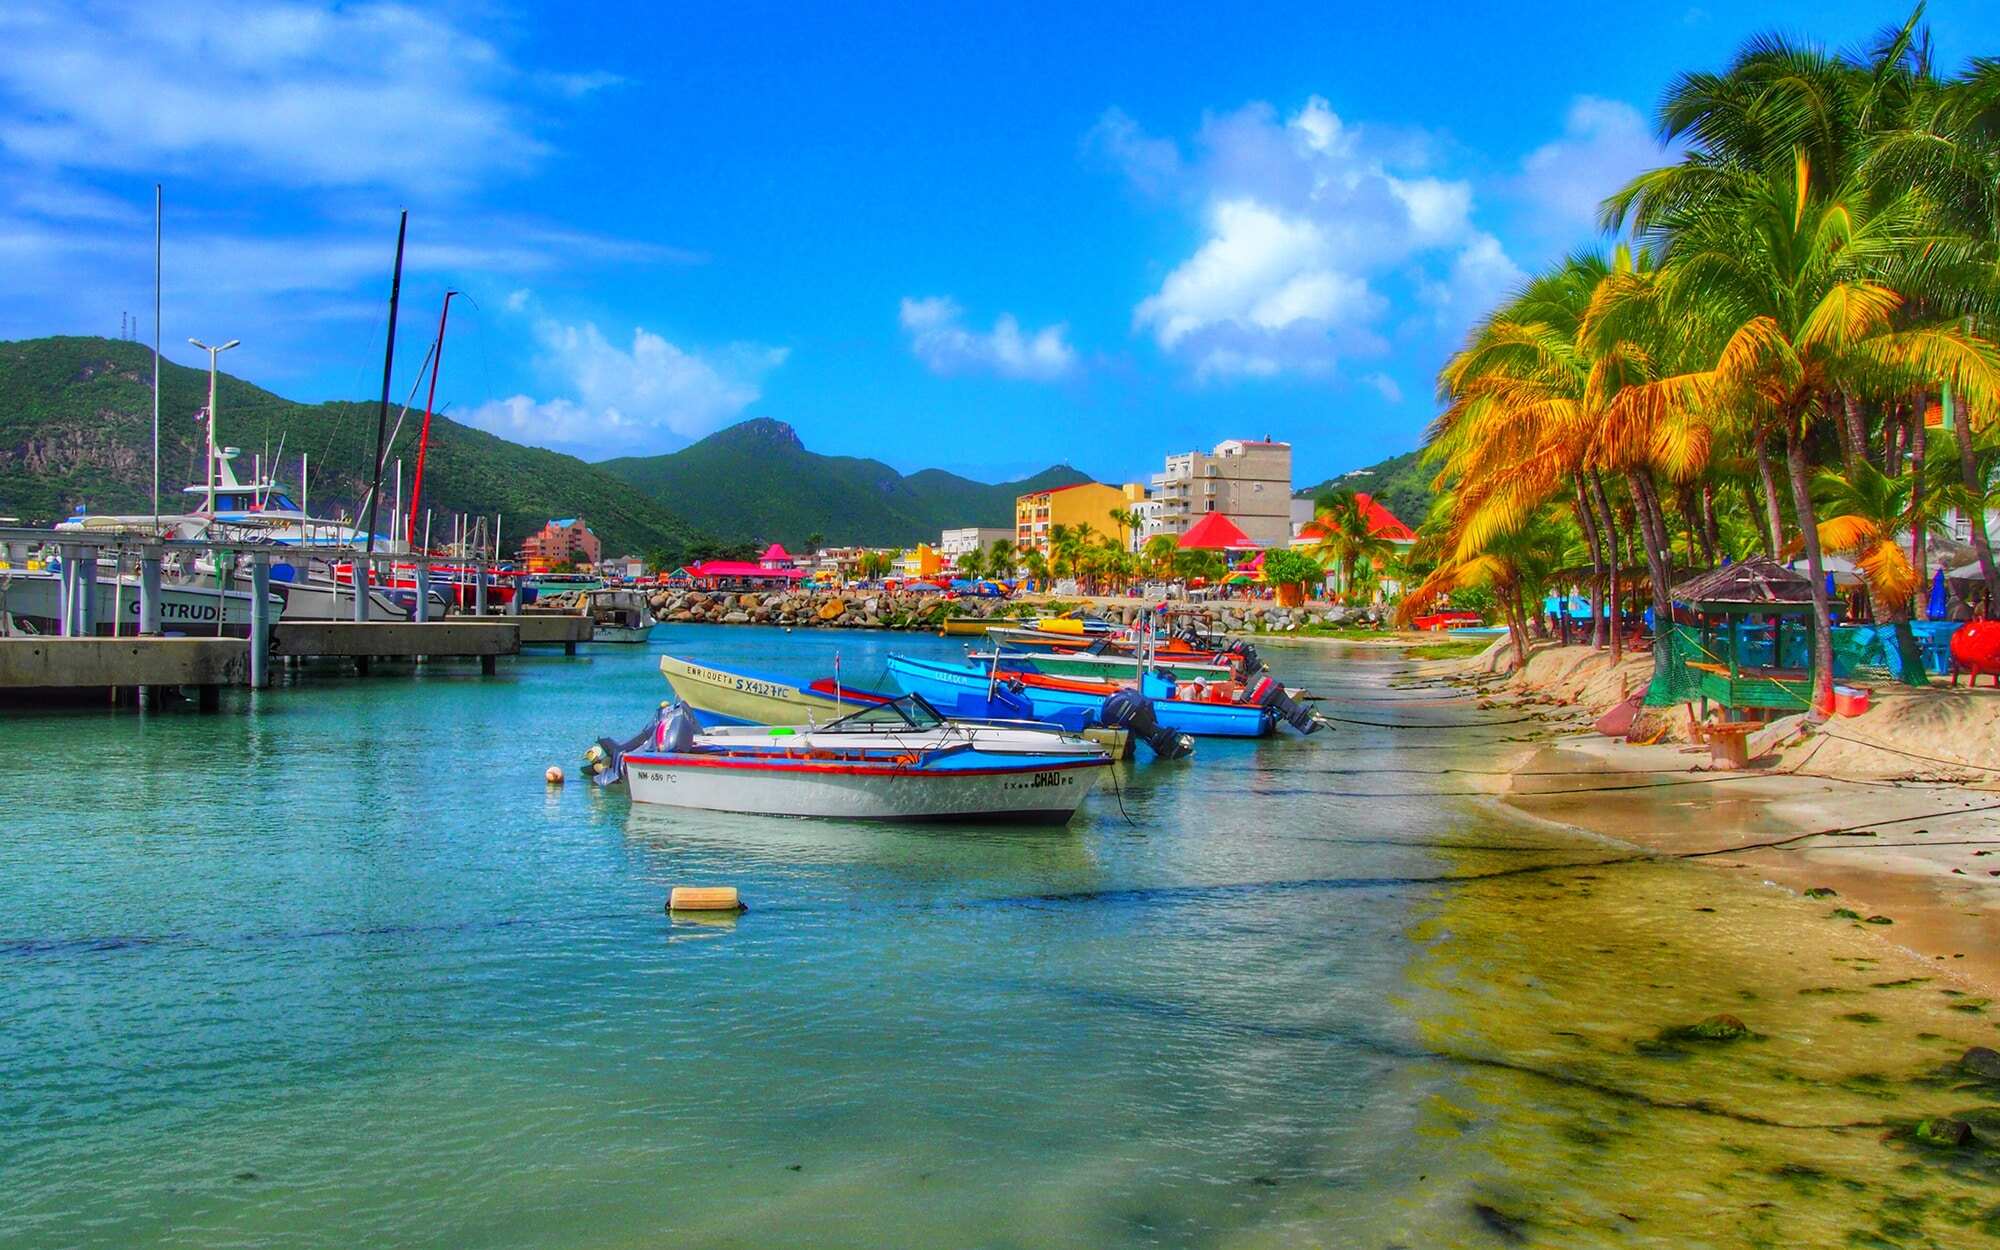 st-maarten-cruise-port-guide-things-to-do-shore-excursions